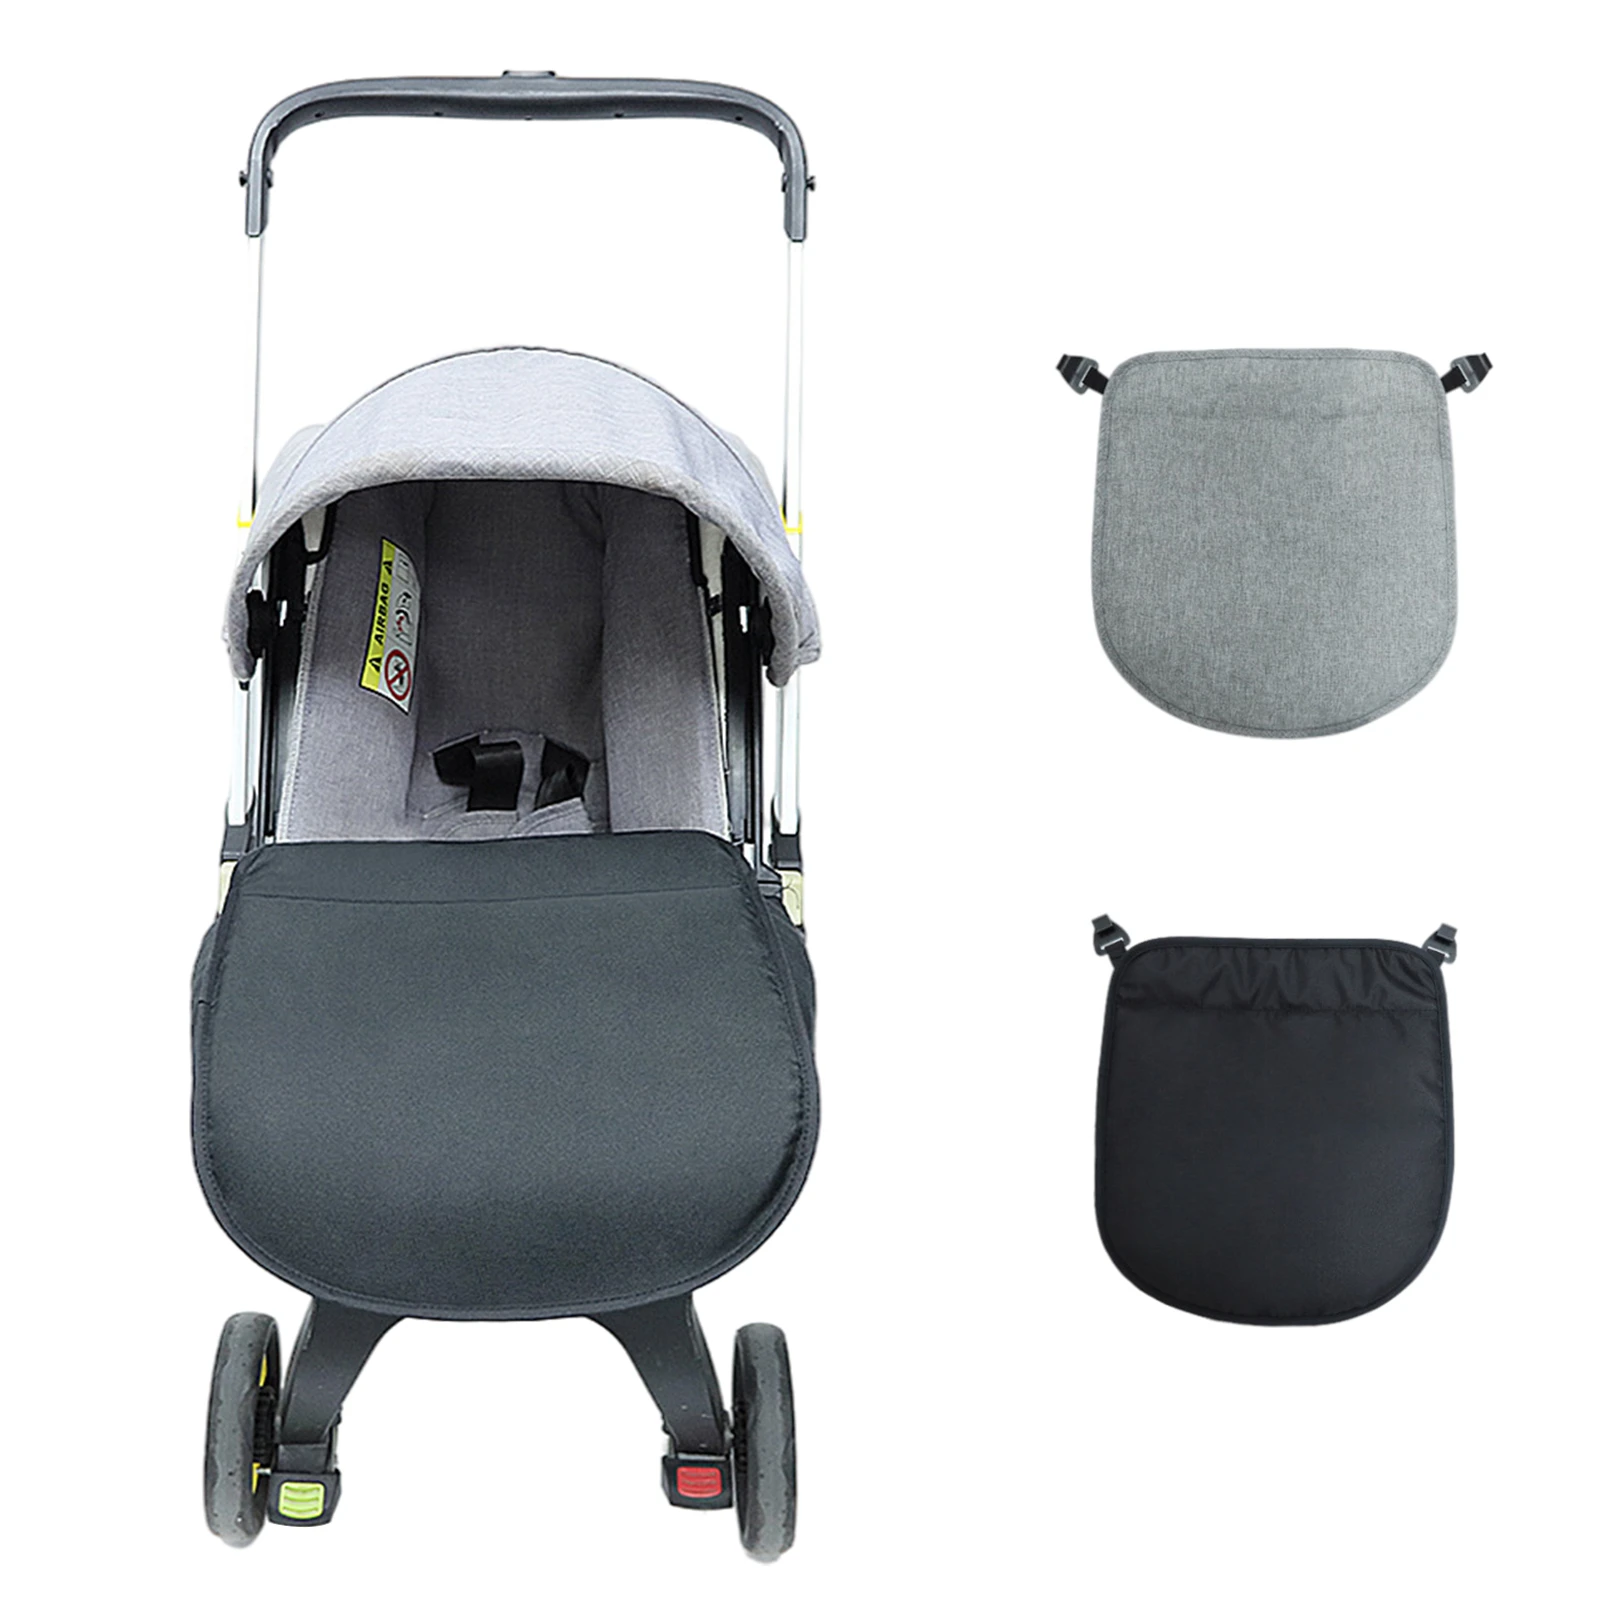 baby stroller accessories	 Baby Stroller Foot Cover For Doona Carriages Foot Covers Waterproof Warm Pram Footmuff Baby Stroller Accessories Pad Footrest best baby stroller accessories	